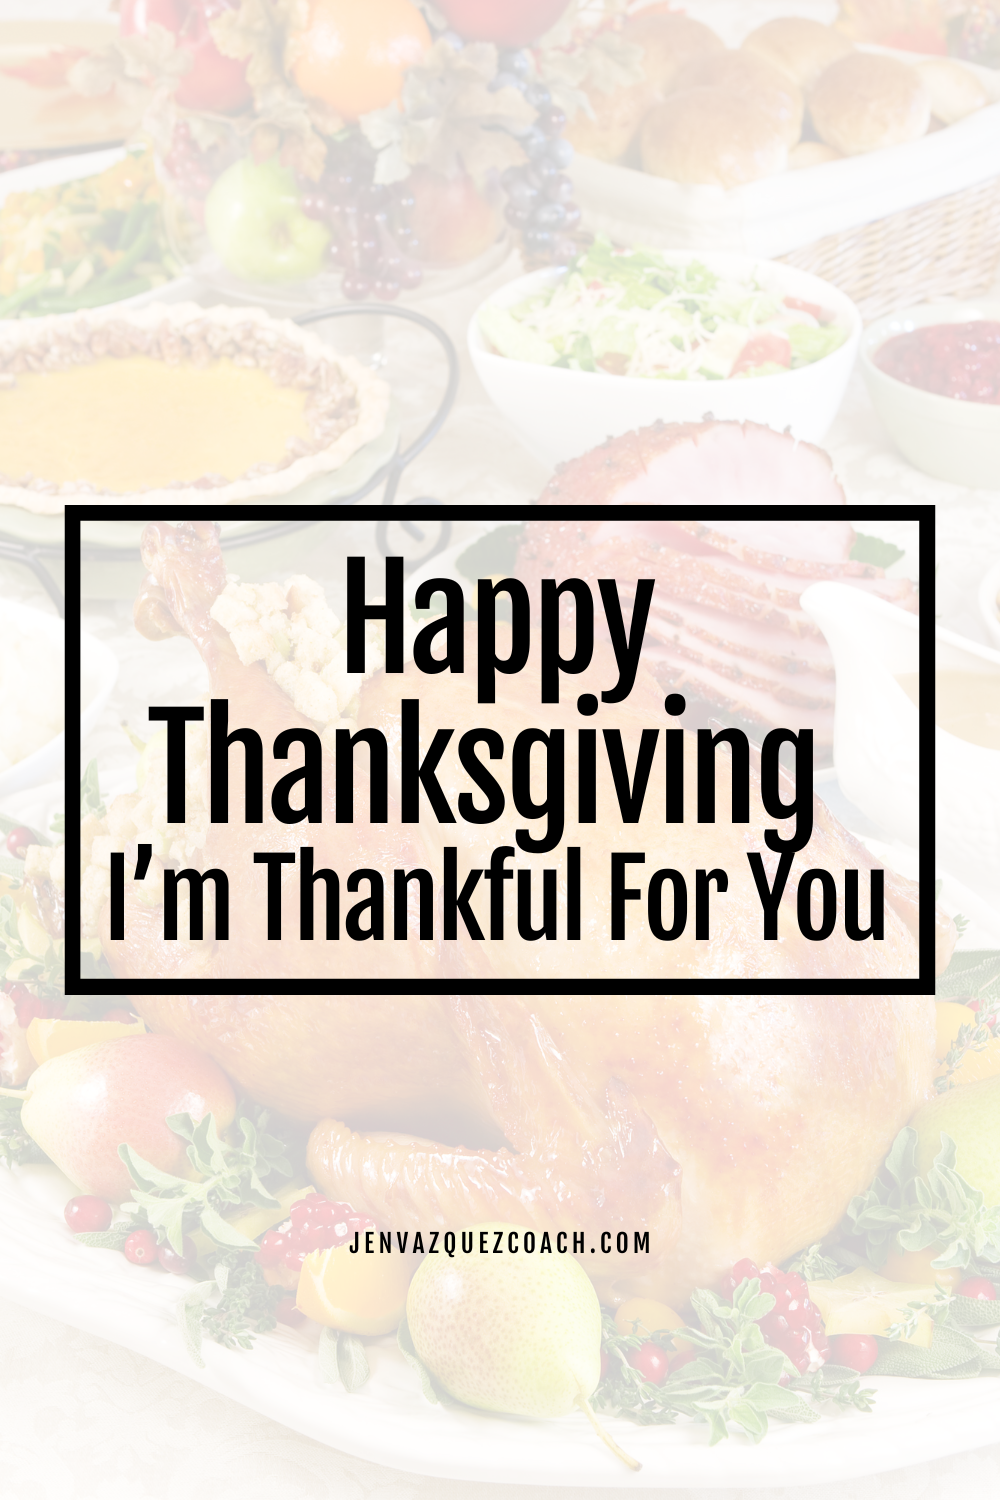 Happy Thanksgiving.  I'm Thankful for You!